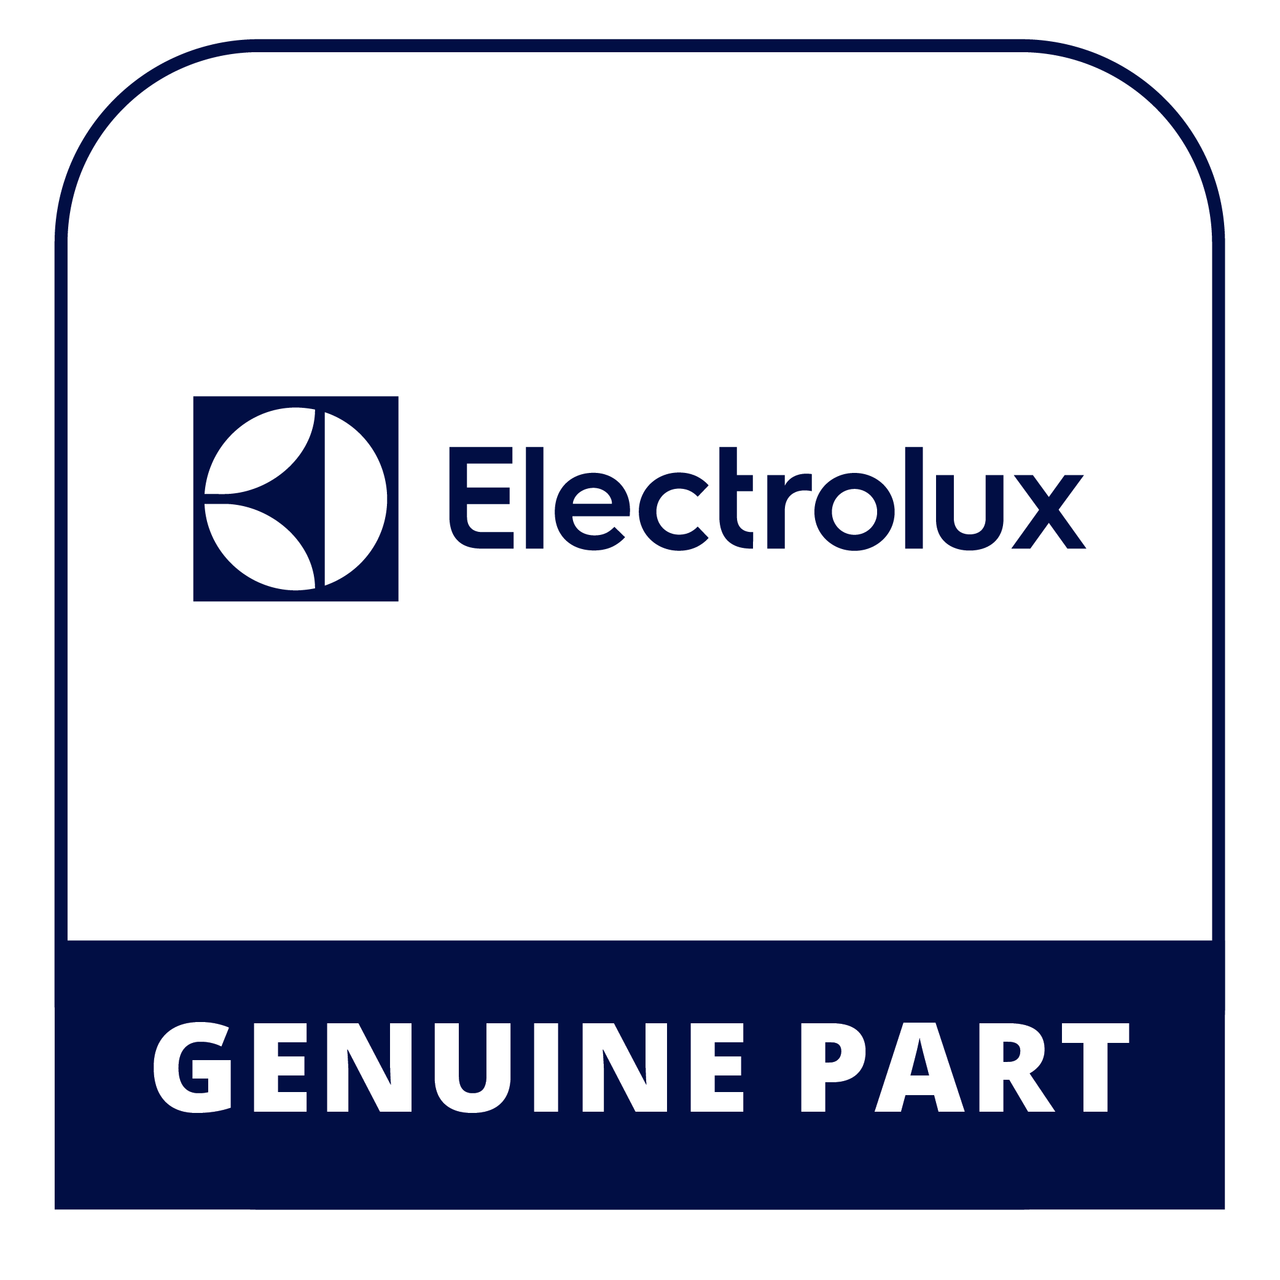 Frigidaire - Electrolux 318205112 Owners Manual - Genuine Electrolux Part